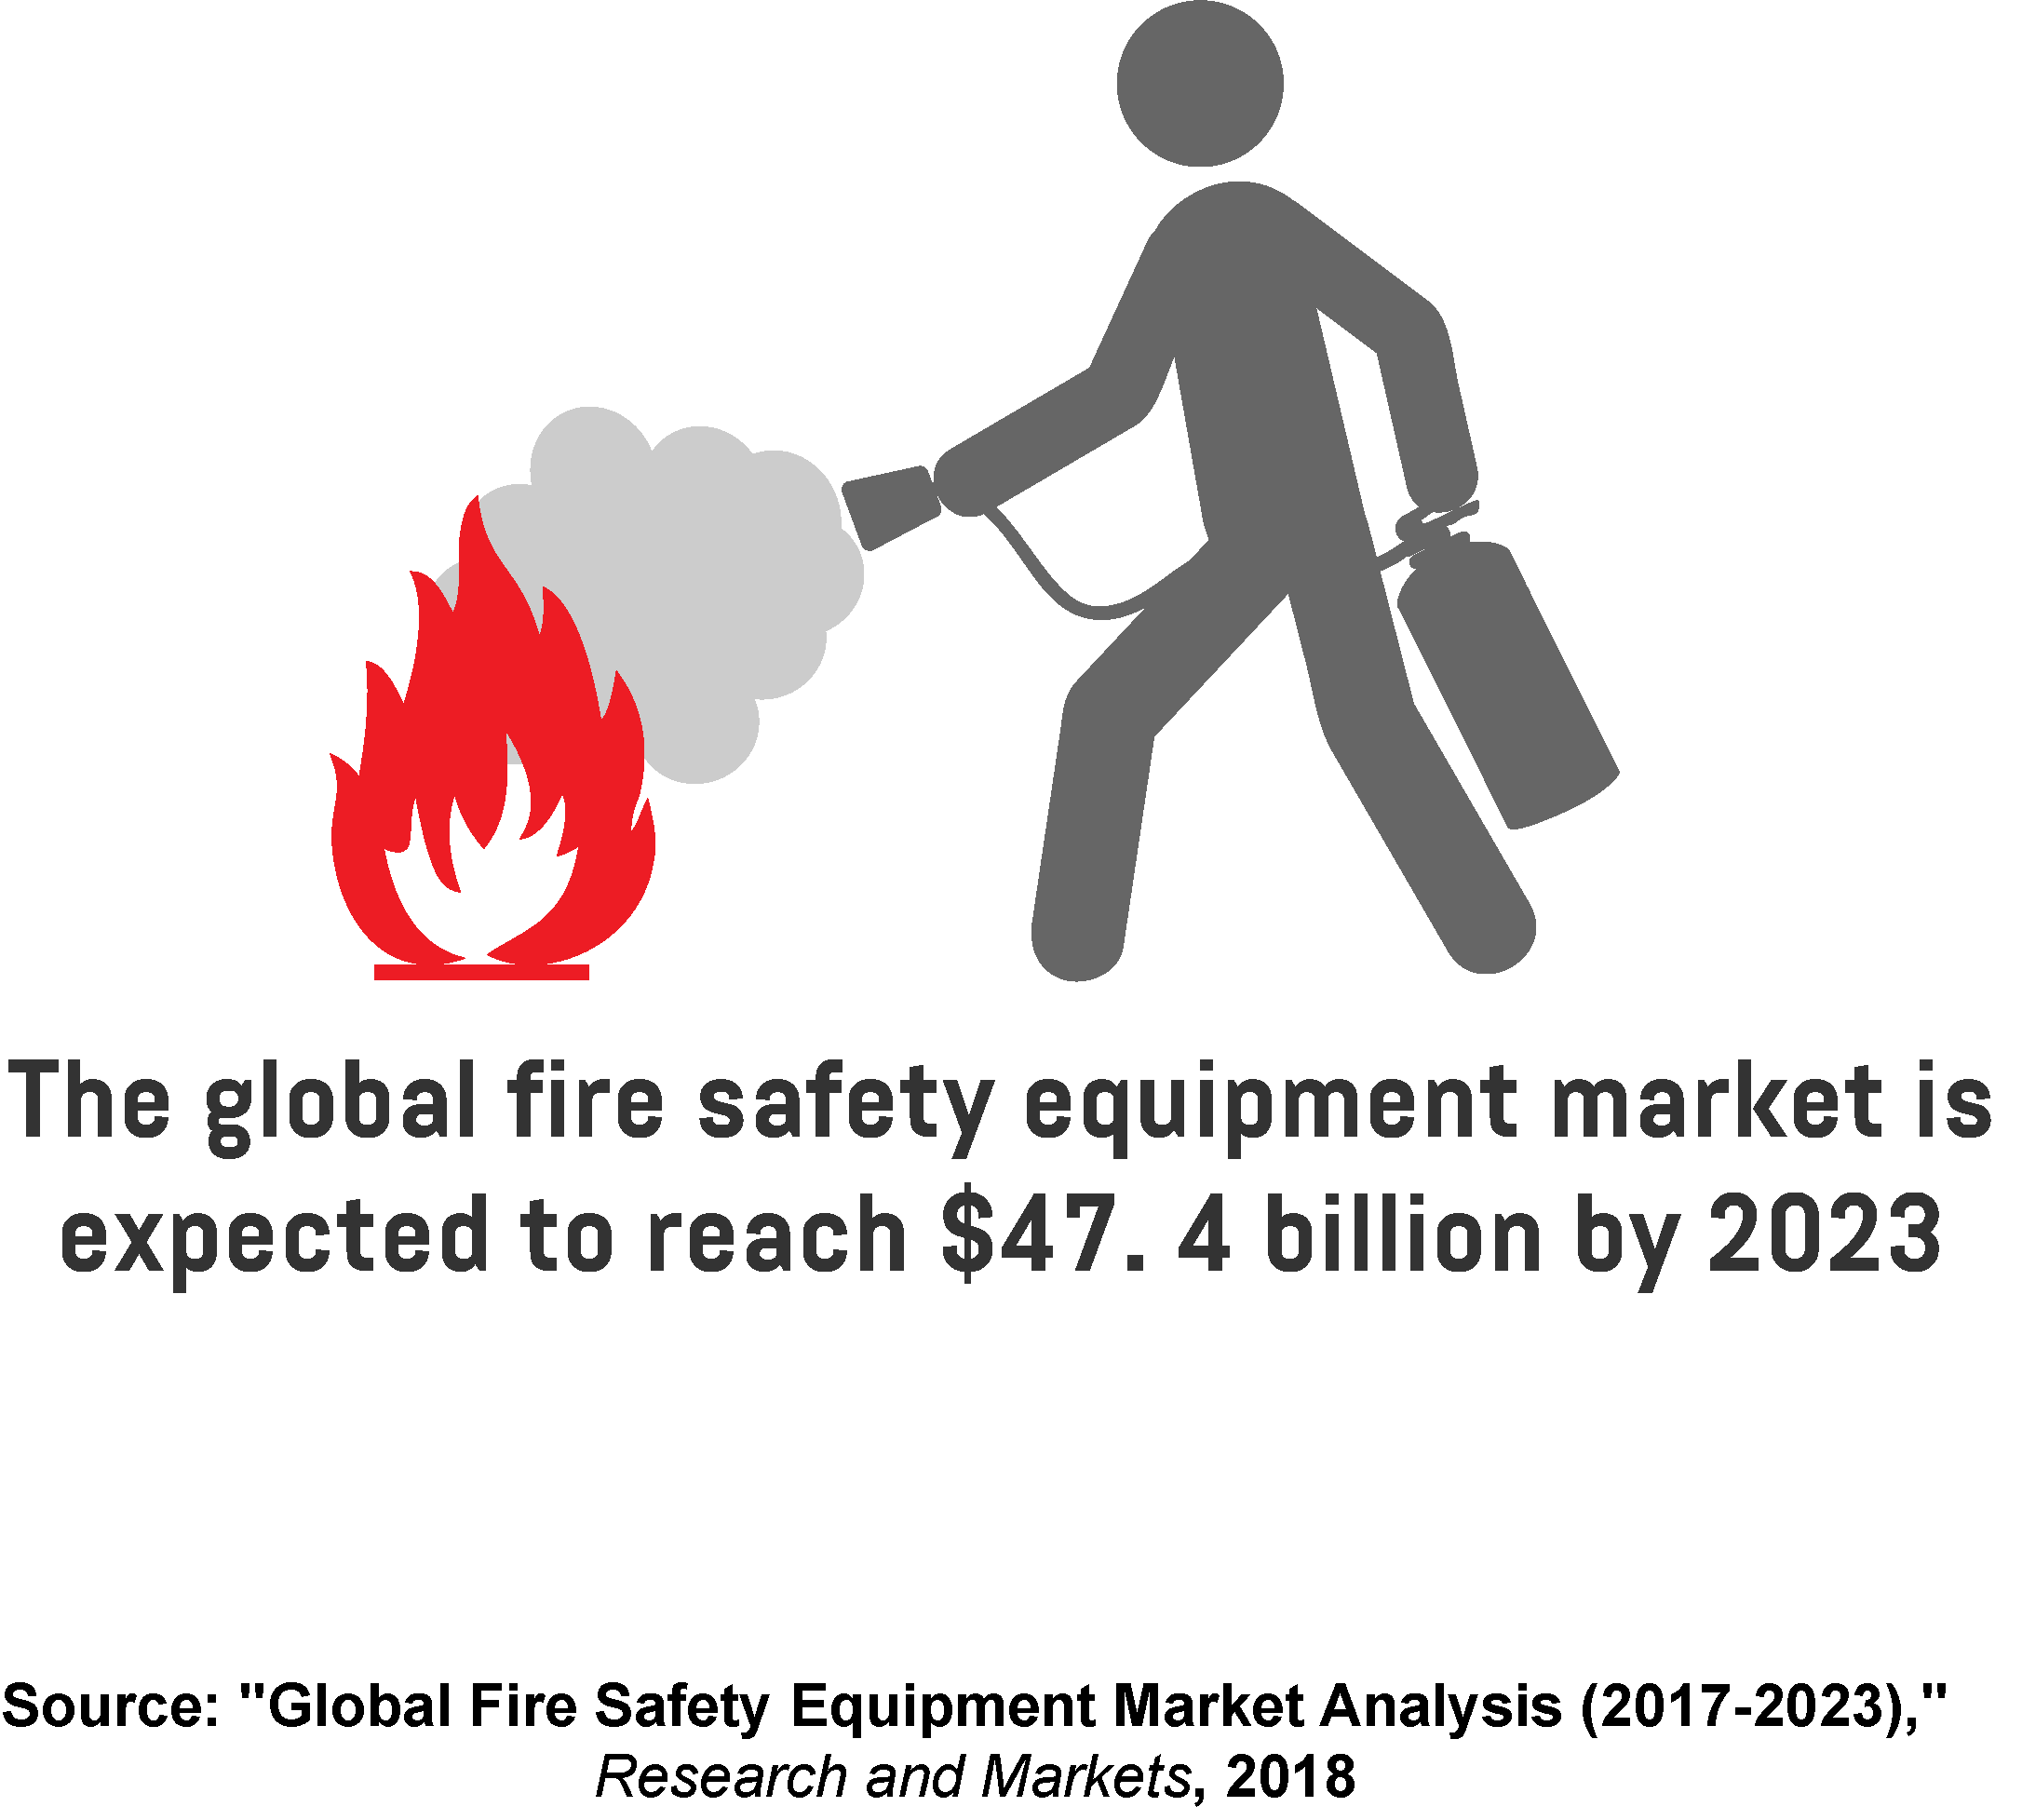 Infographic showing the expected value of the global fire safety equipment market by 2023.